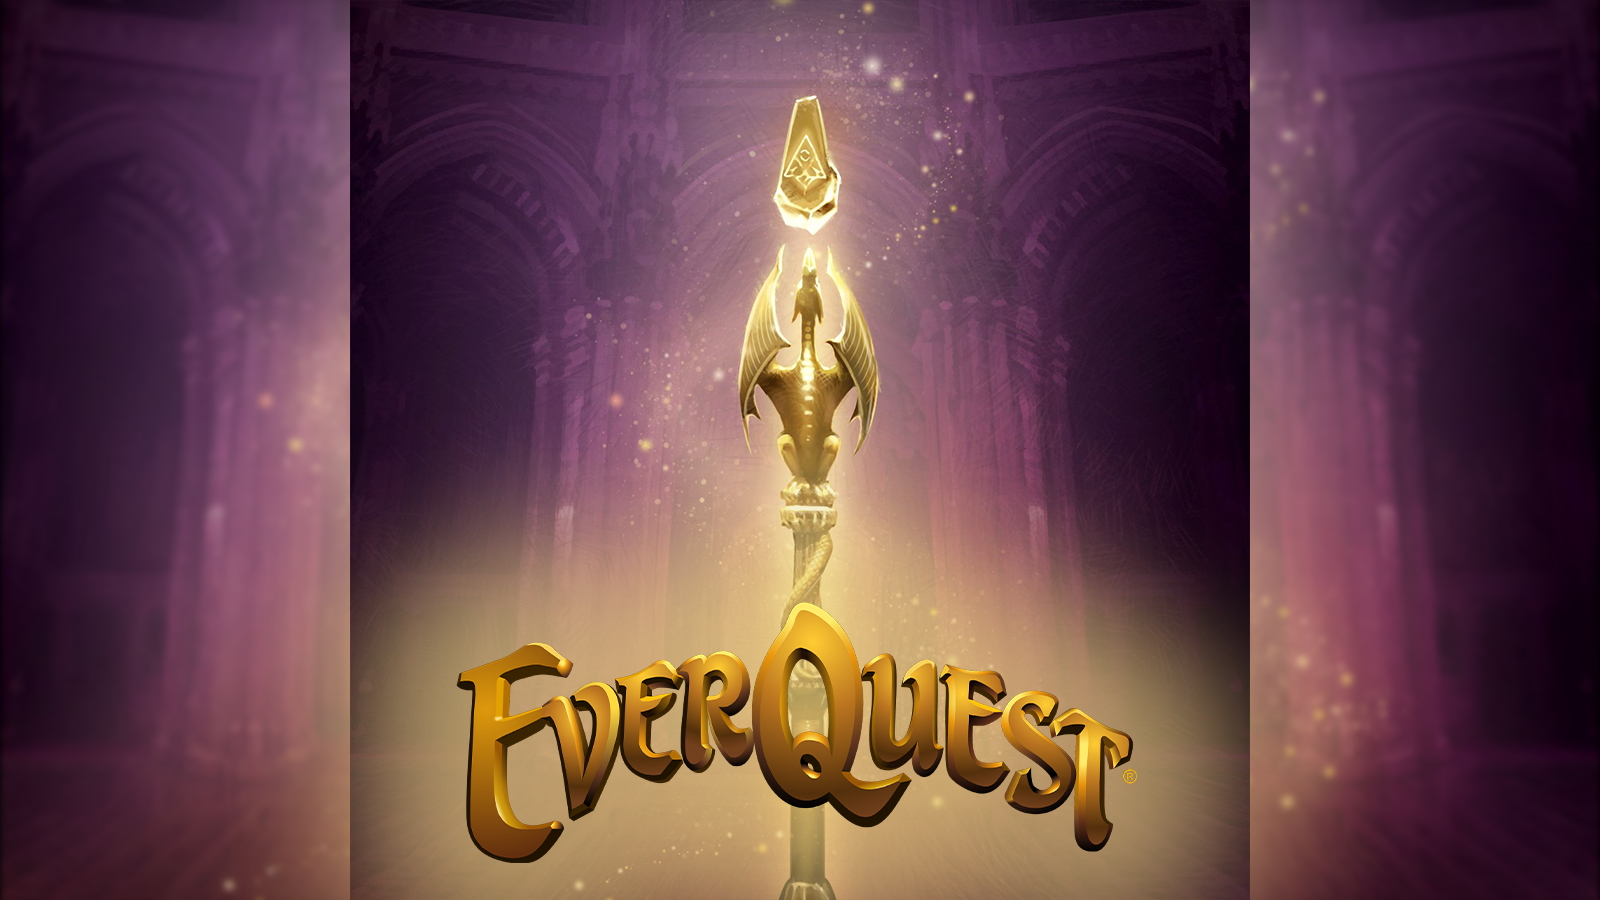 Everquest Is Taking Applications to Its Relaunched Community Council